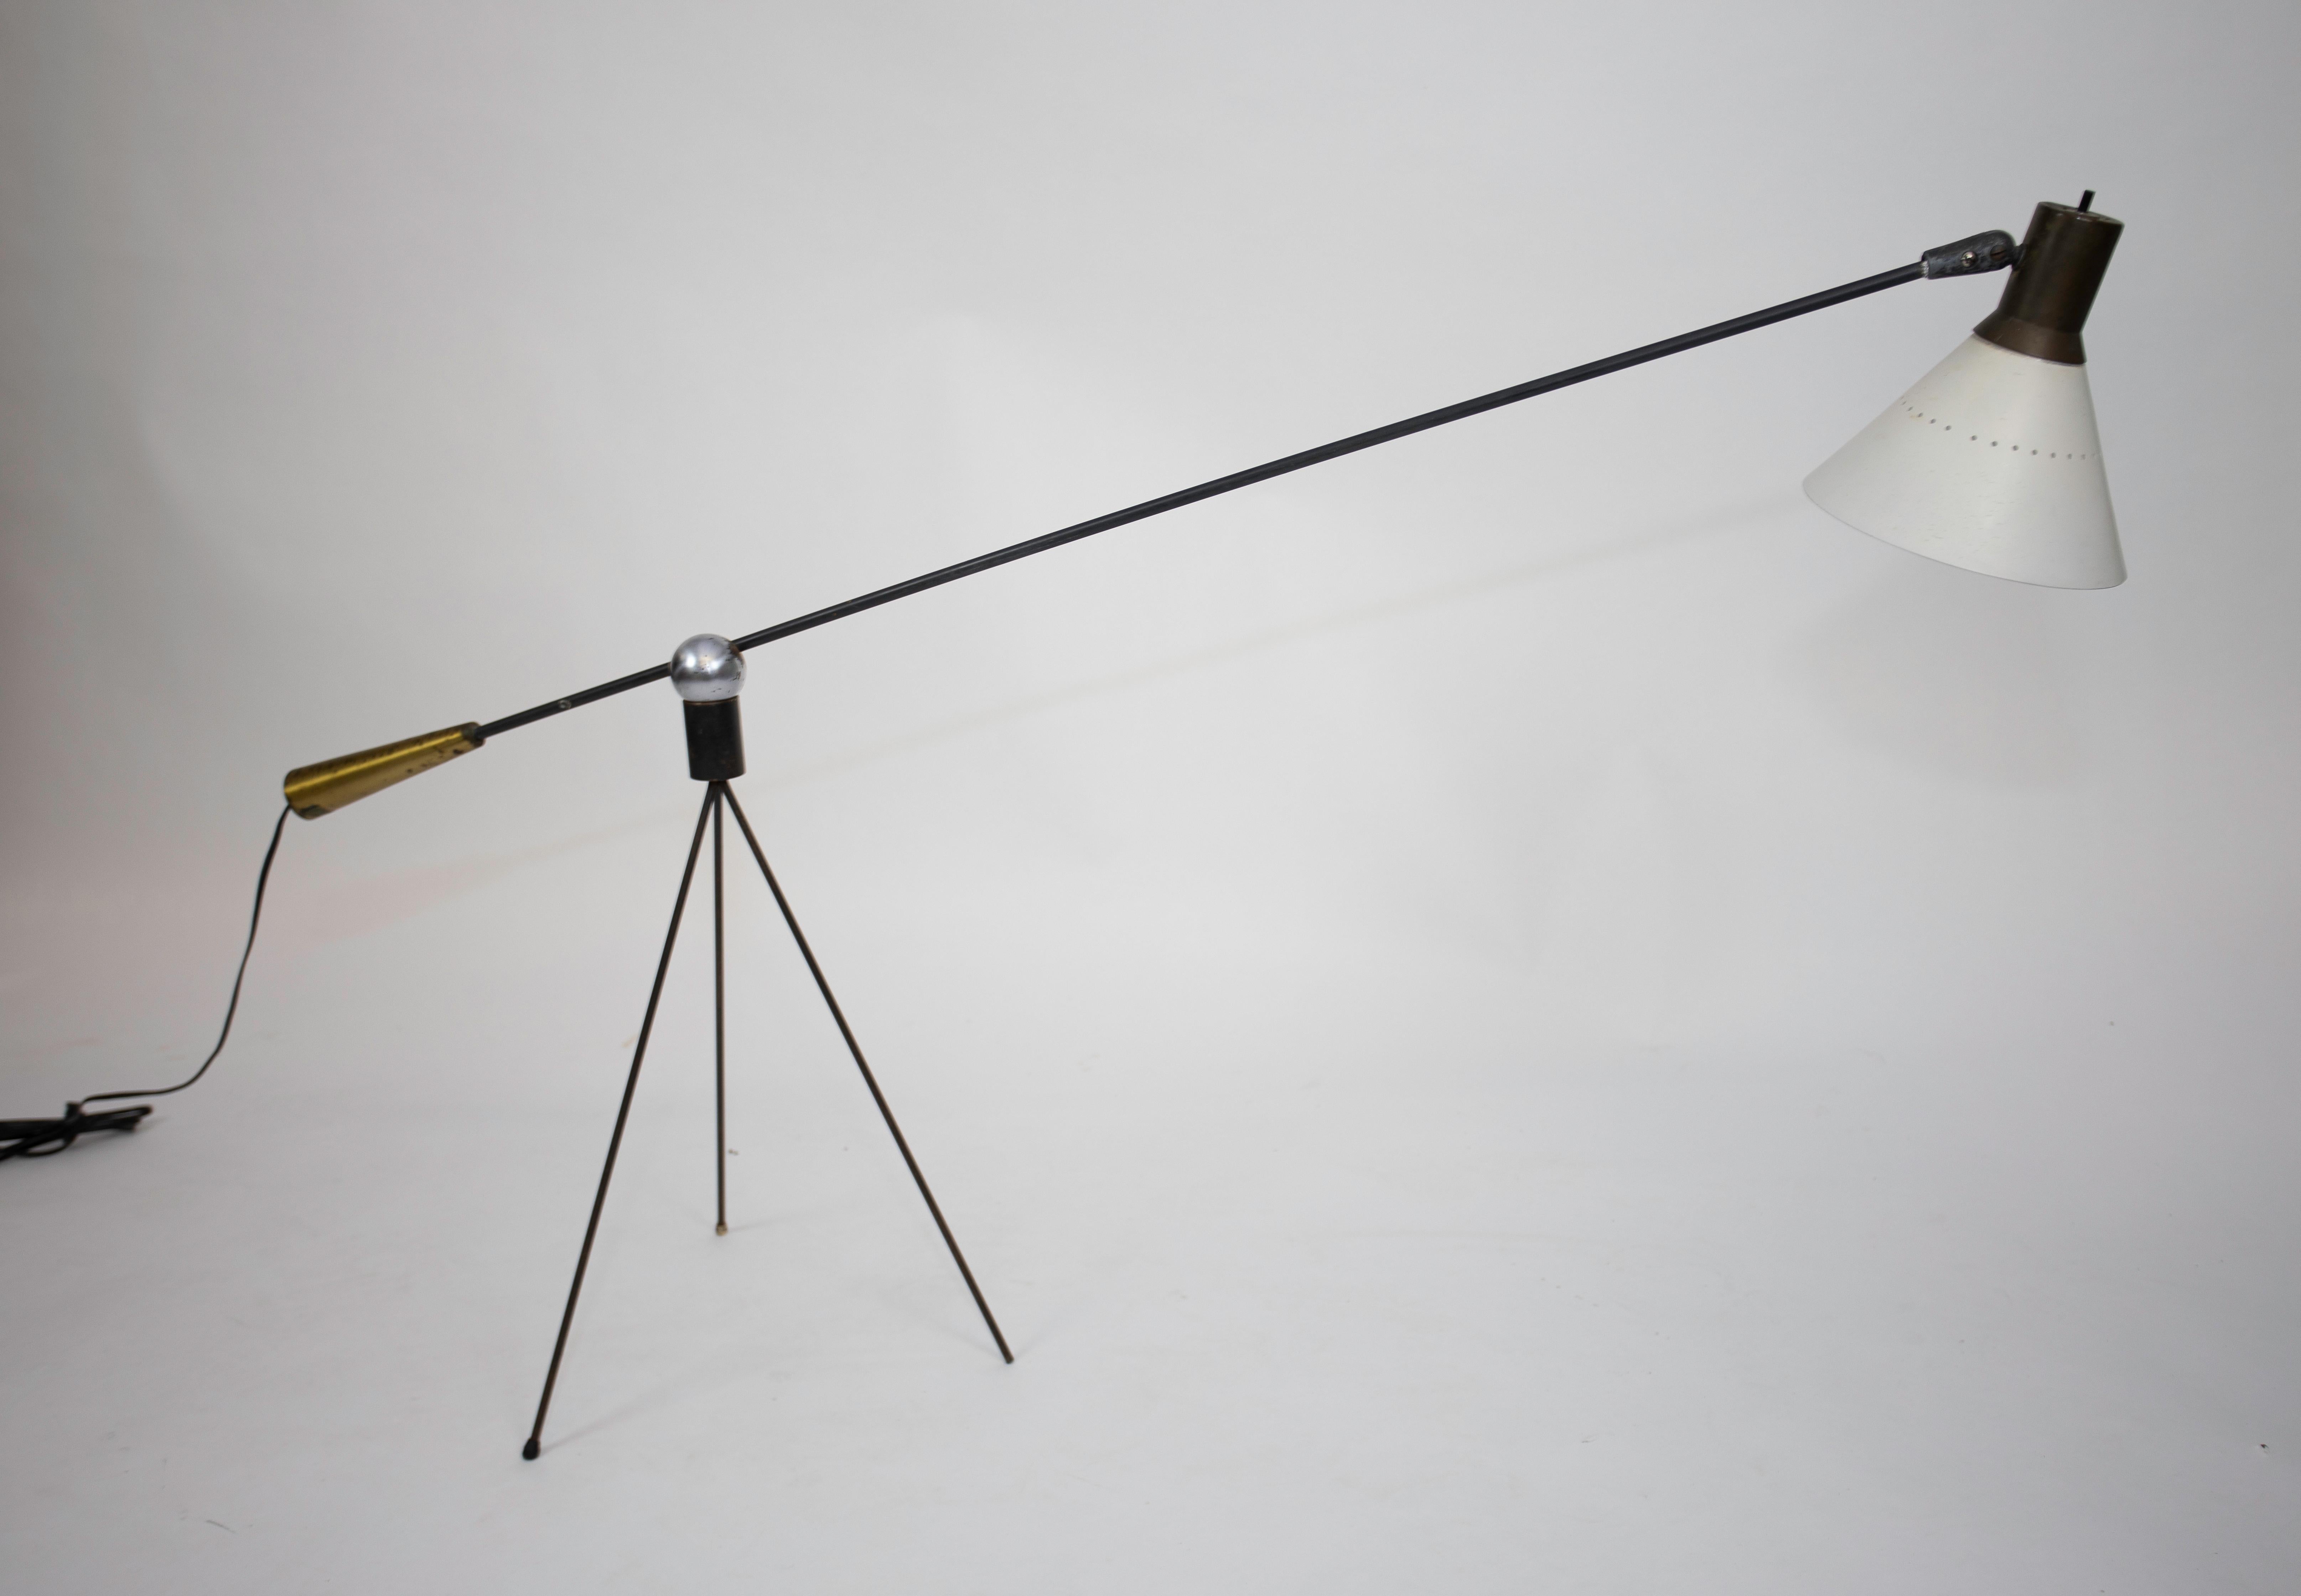 Chosen to be 1 of 10 lamps in the Museum of modern Art Lighting competition, 1951
This Design received the special prize designation
The socket is magnetic allowing multiple heights and positions
Original surface
Manufactured by Heifetz.

